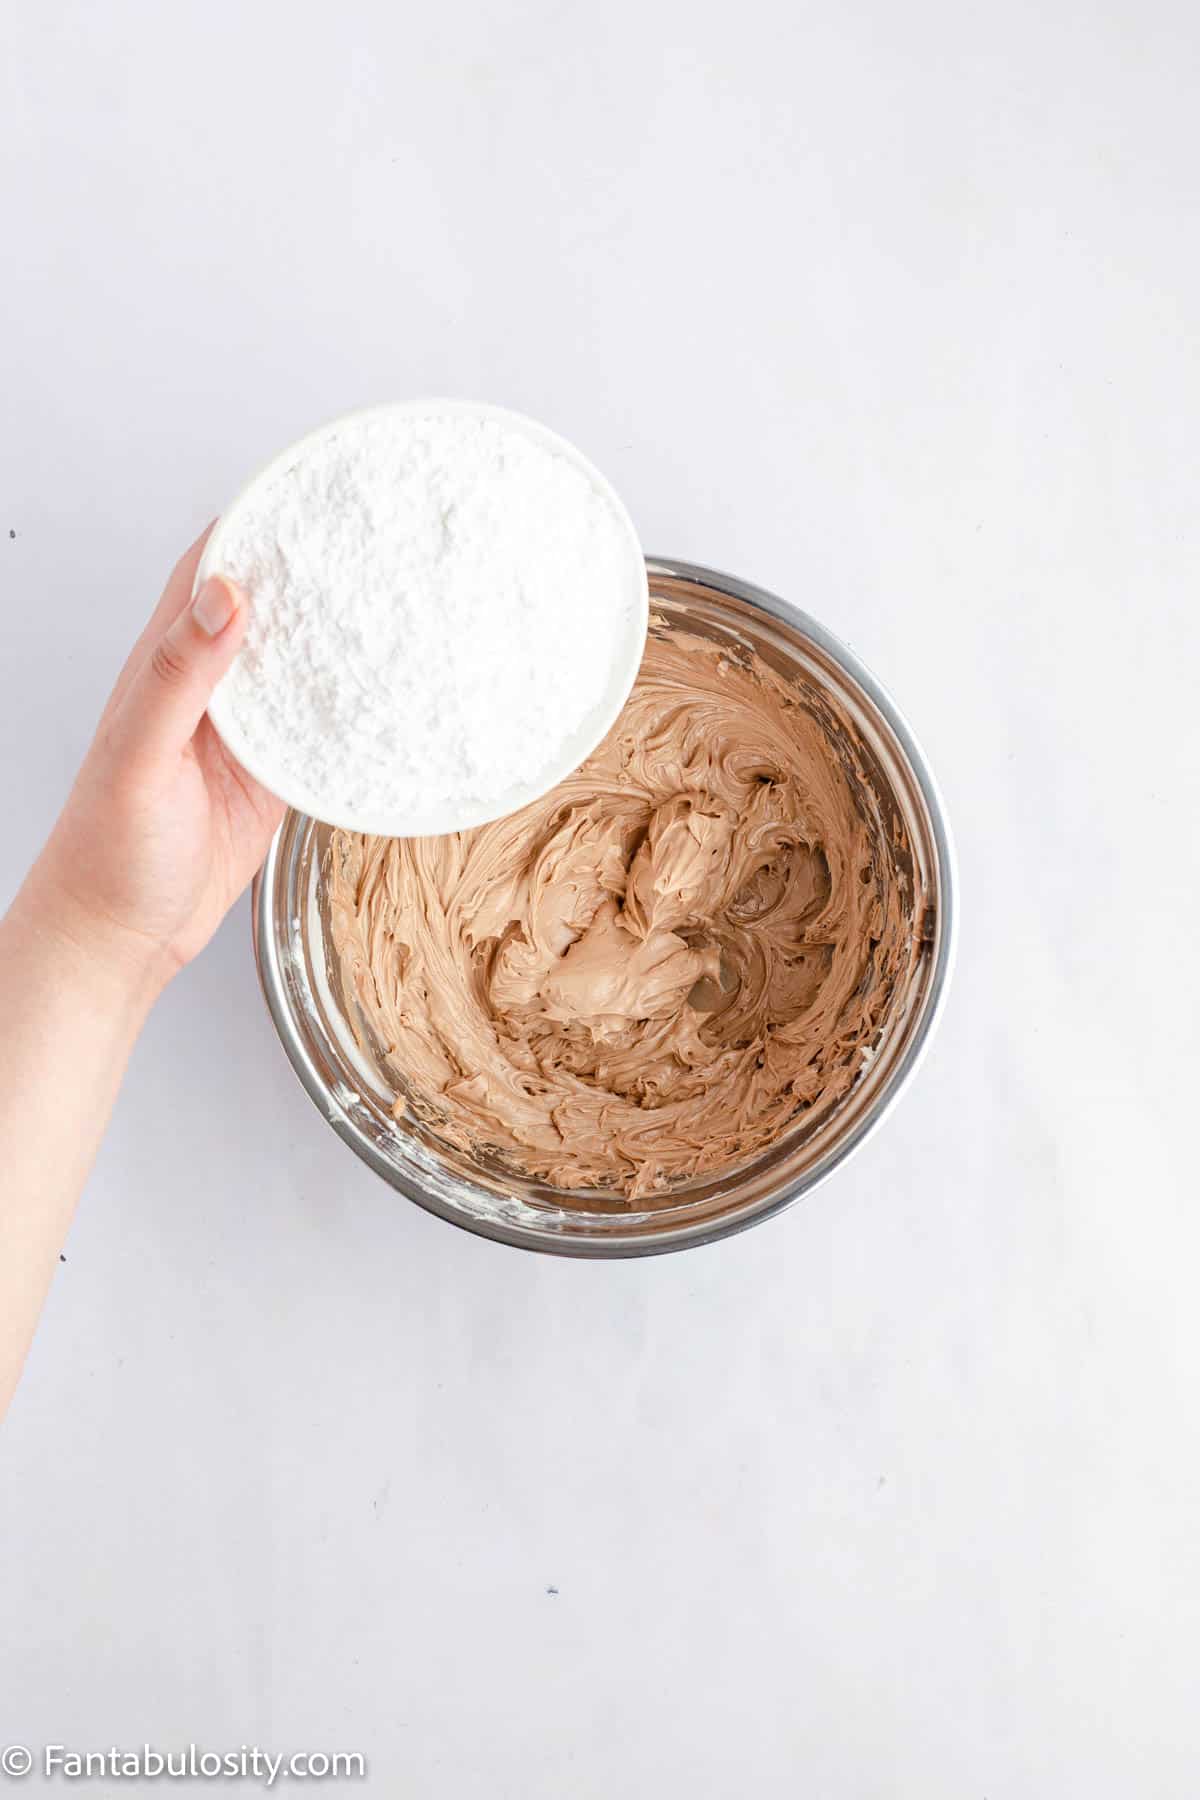 A hand is holding a bowl of powdered sugar ready to be added to a bowl of chocolate cream cheese frosting